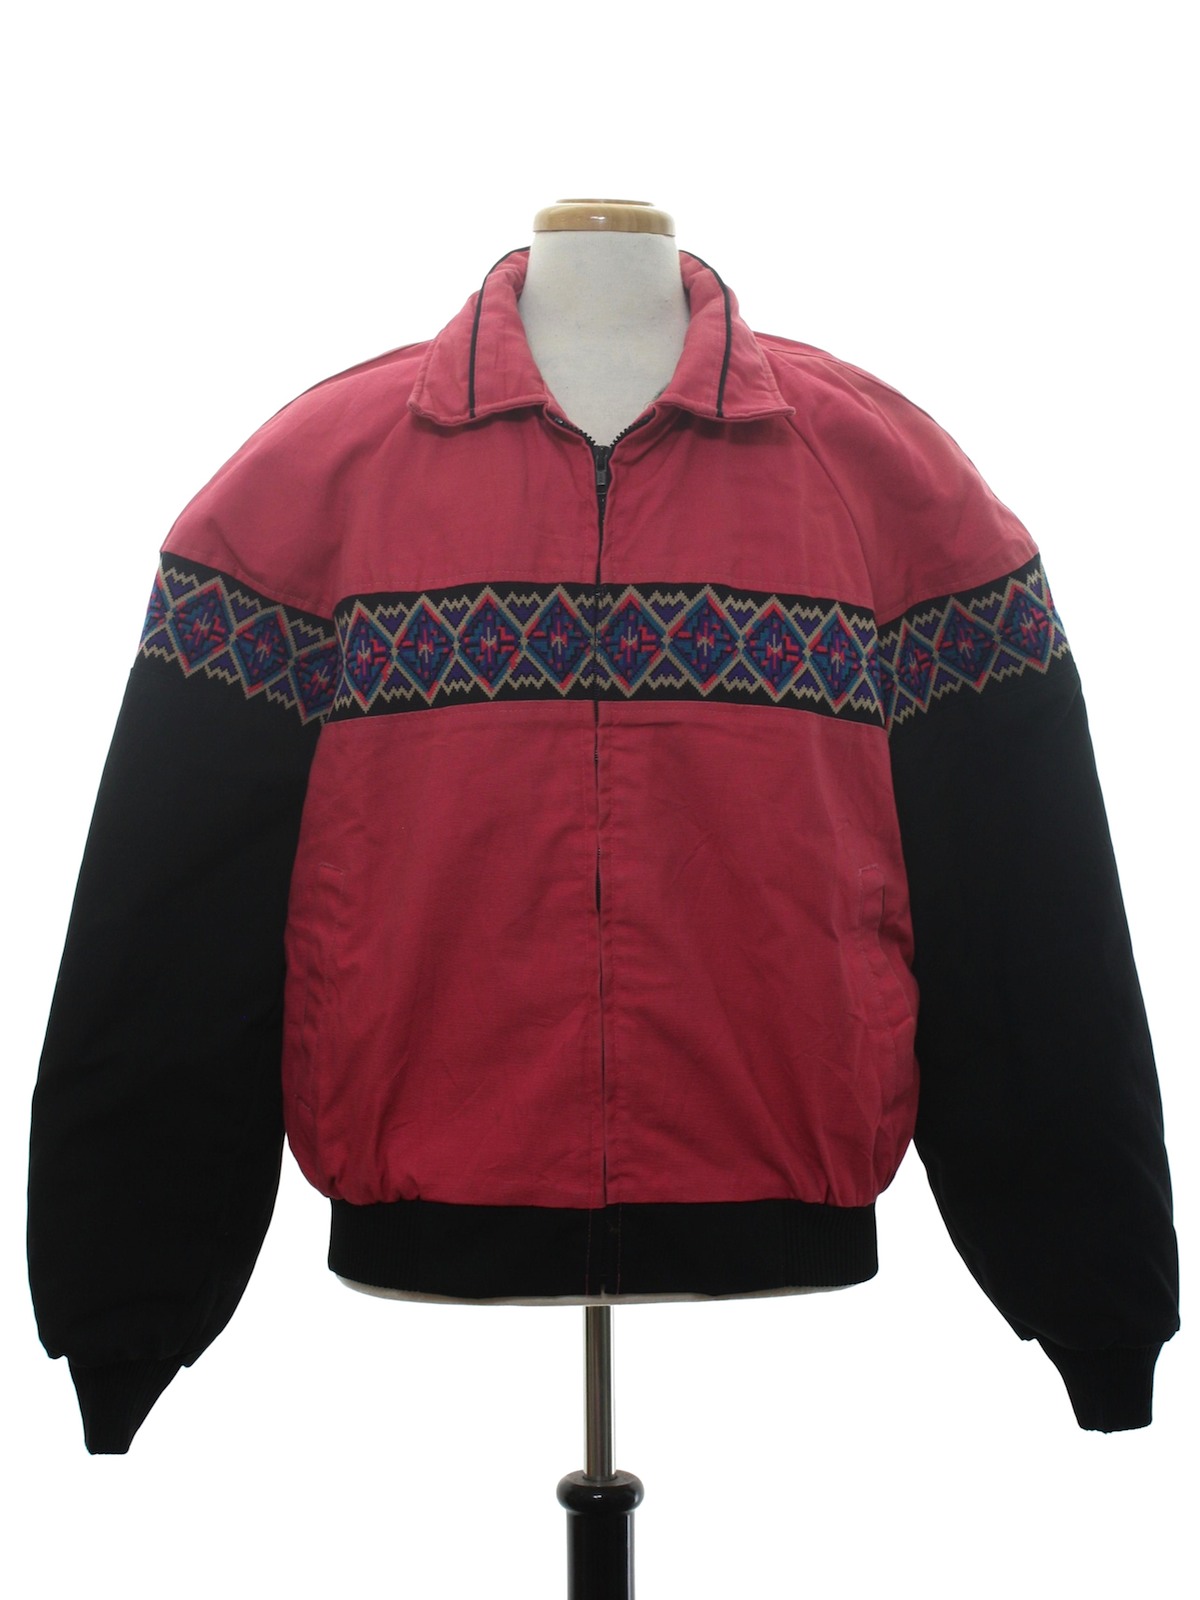 sum Pinpoint royalty Retro 80's Jacket: 80s -Deuces And Jacks- Mens pink background, longsleeve,  zippered front polyester cotton totally 80s western style jacket with fold  over collar featuring purple, tan, black, pink and teal geometric